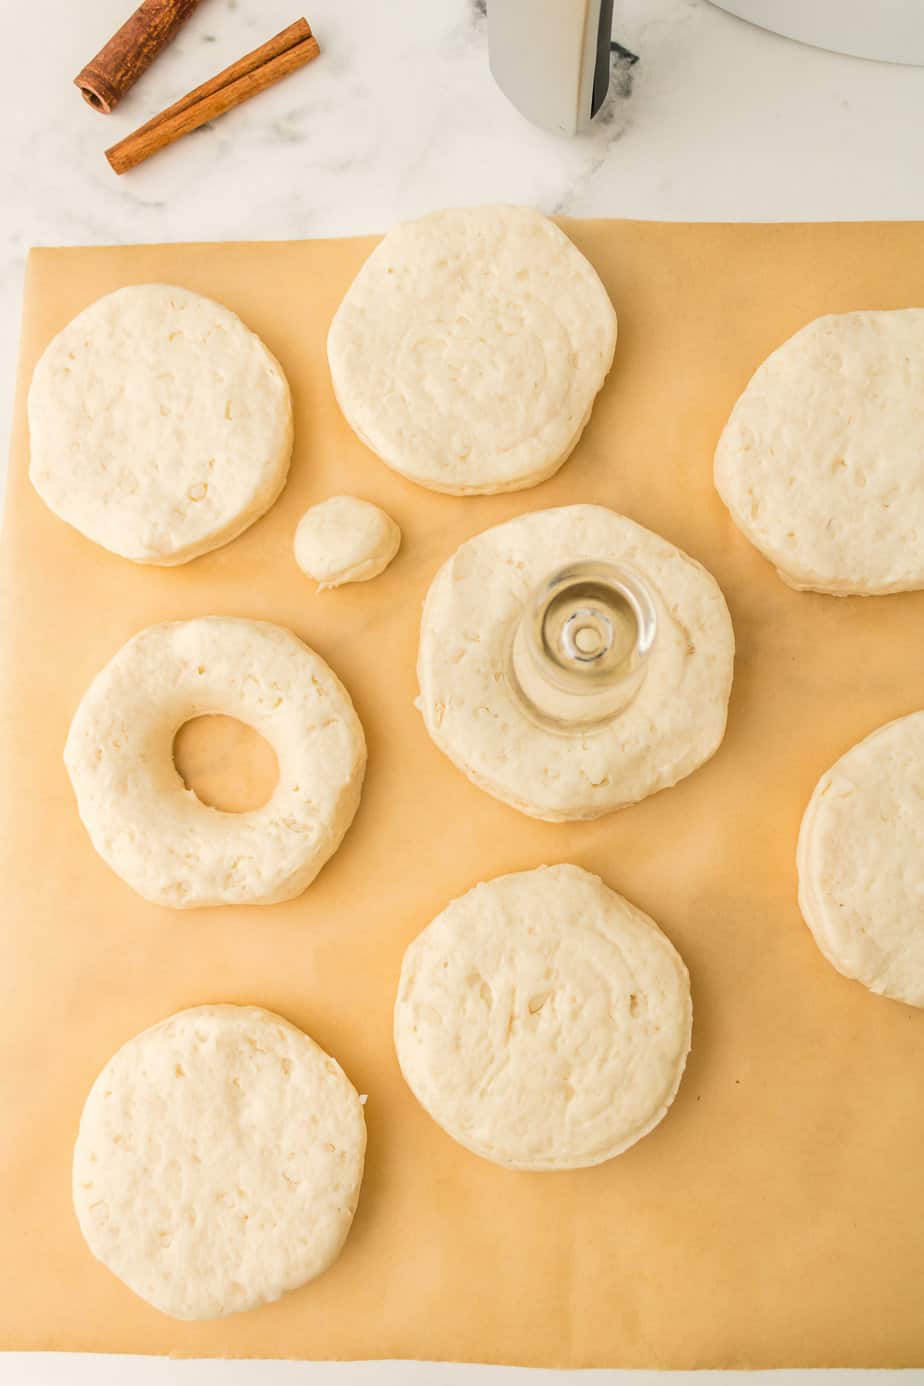 Slicing refrigerated biscuit dough pieces into round donuts with a whole in the center on a cutting board from above on a counter.